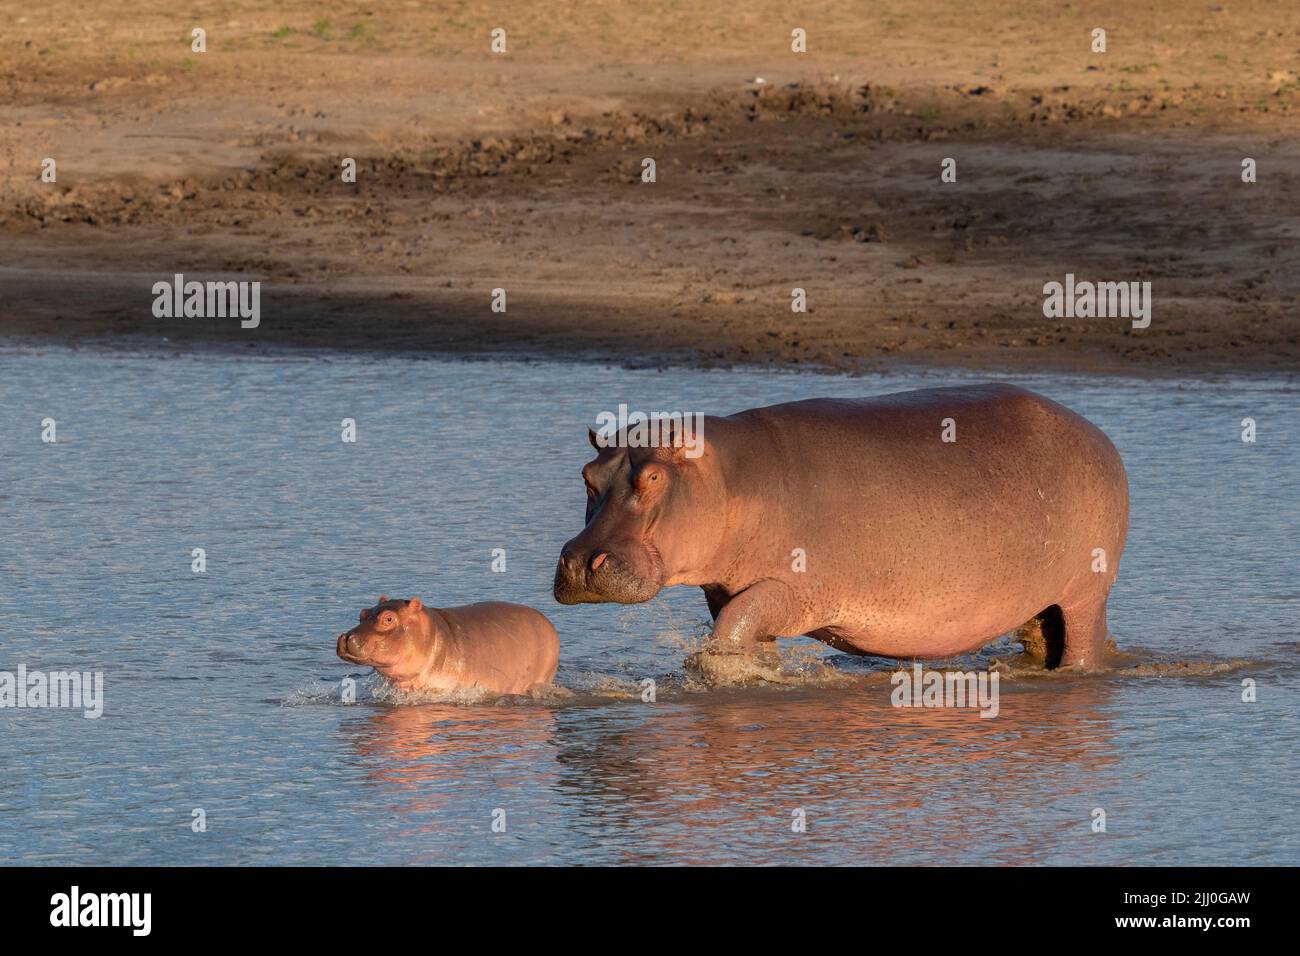 Zambia, South Luangwa National Park. Hippopotomus mother and baby in river (WILD: Hippopotamus amphibius) Stock Photo